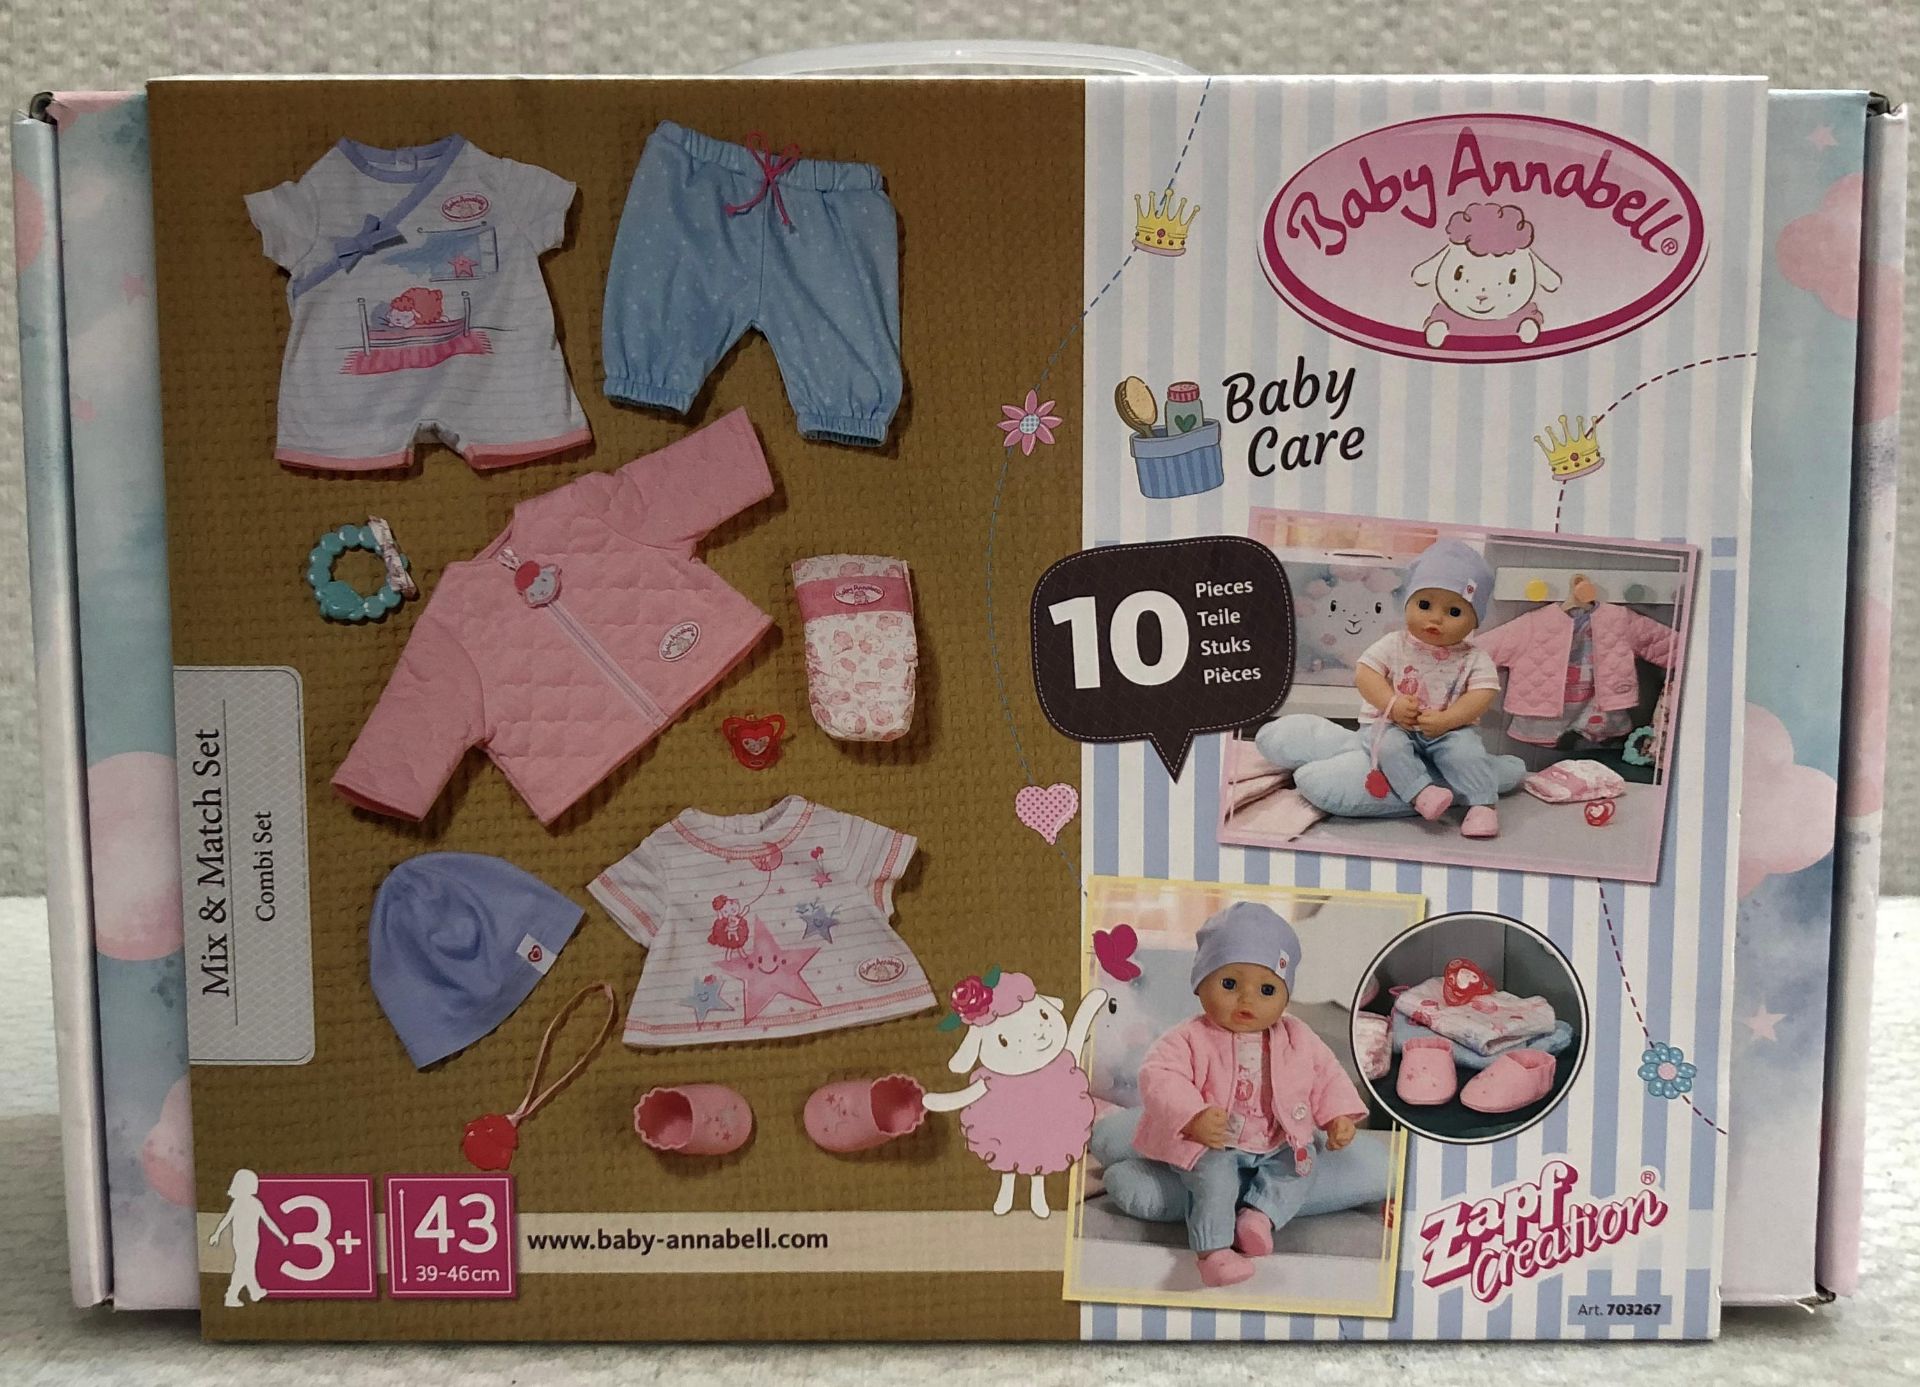 1 x Baby Annabell Baby Mix & Match Combi Set - New/Boxed - HTYS312 - CL987 - Location: Altrincham - Image 3 of 3